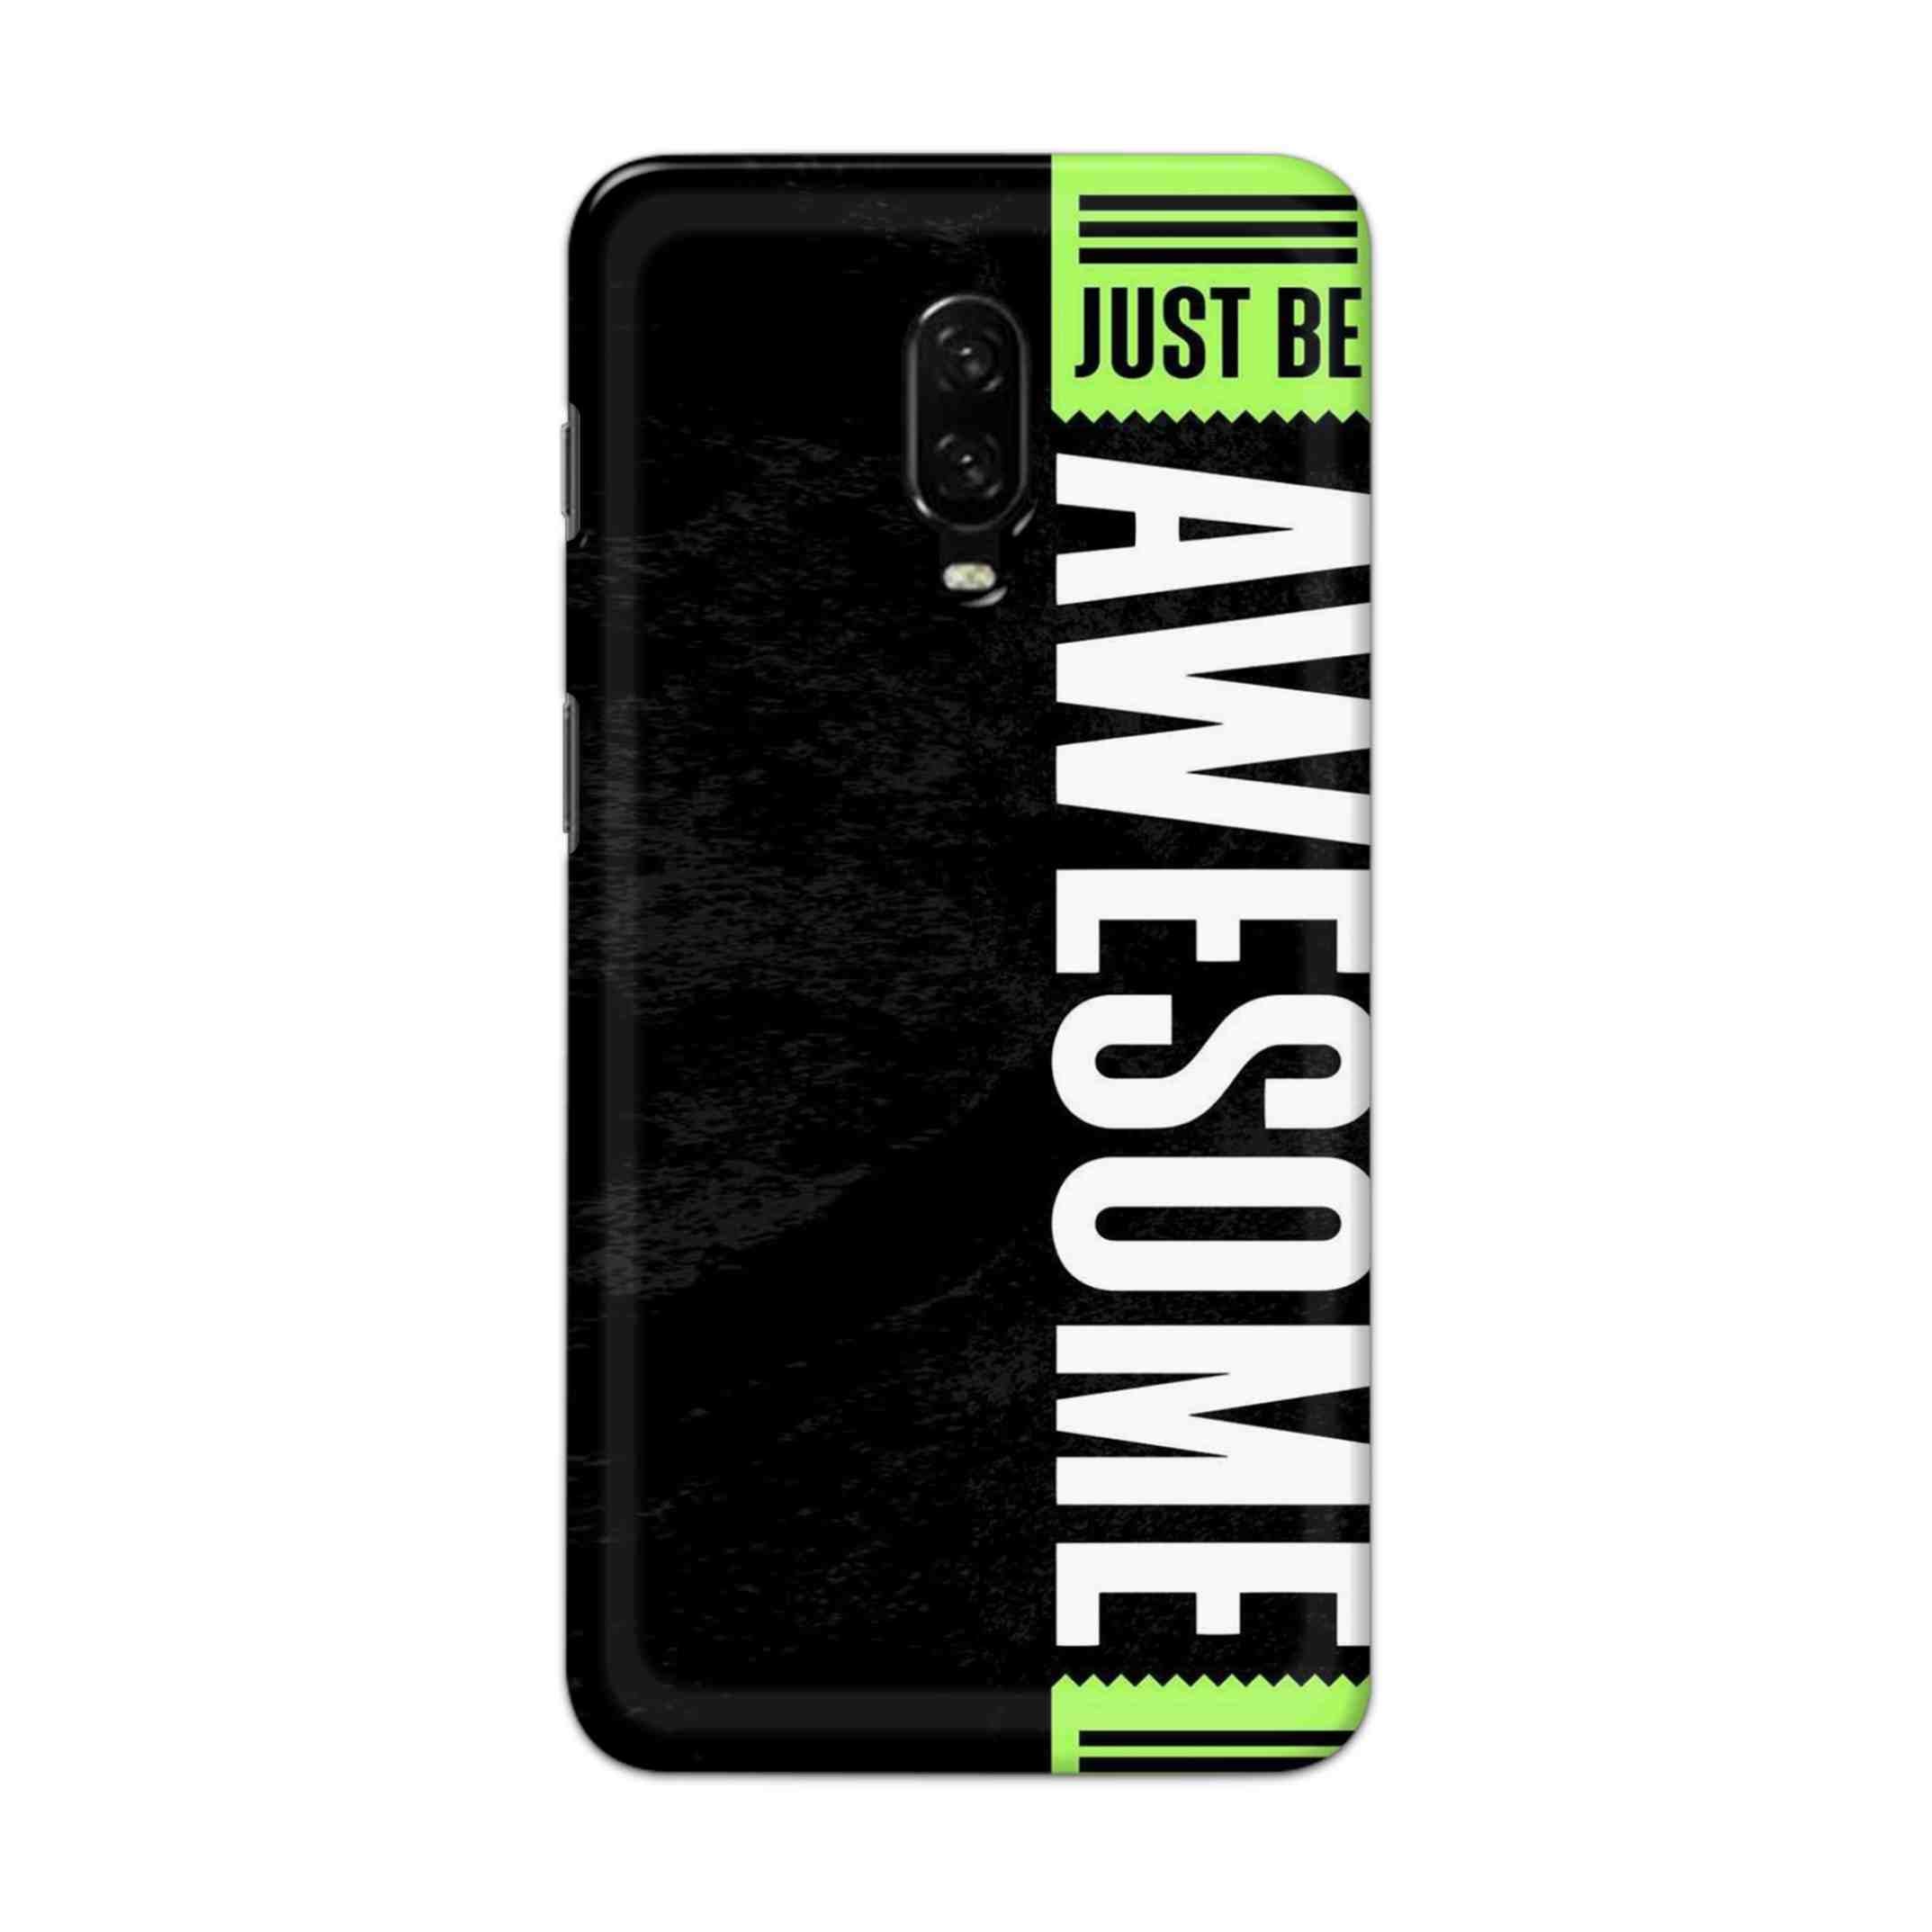 Buy Awesome Street Hard Back Mobile Phone Case Cover For OnePlus 6T Online